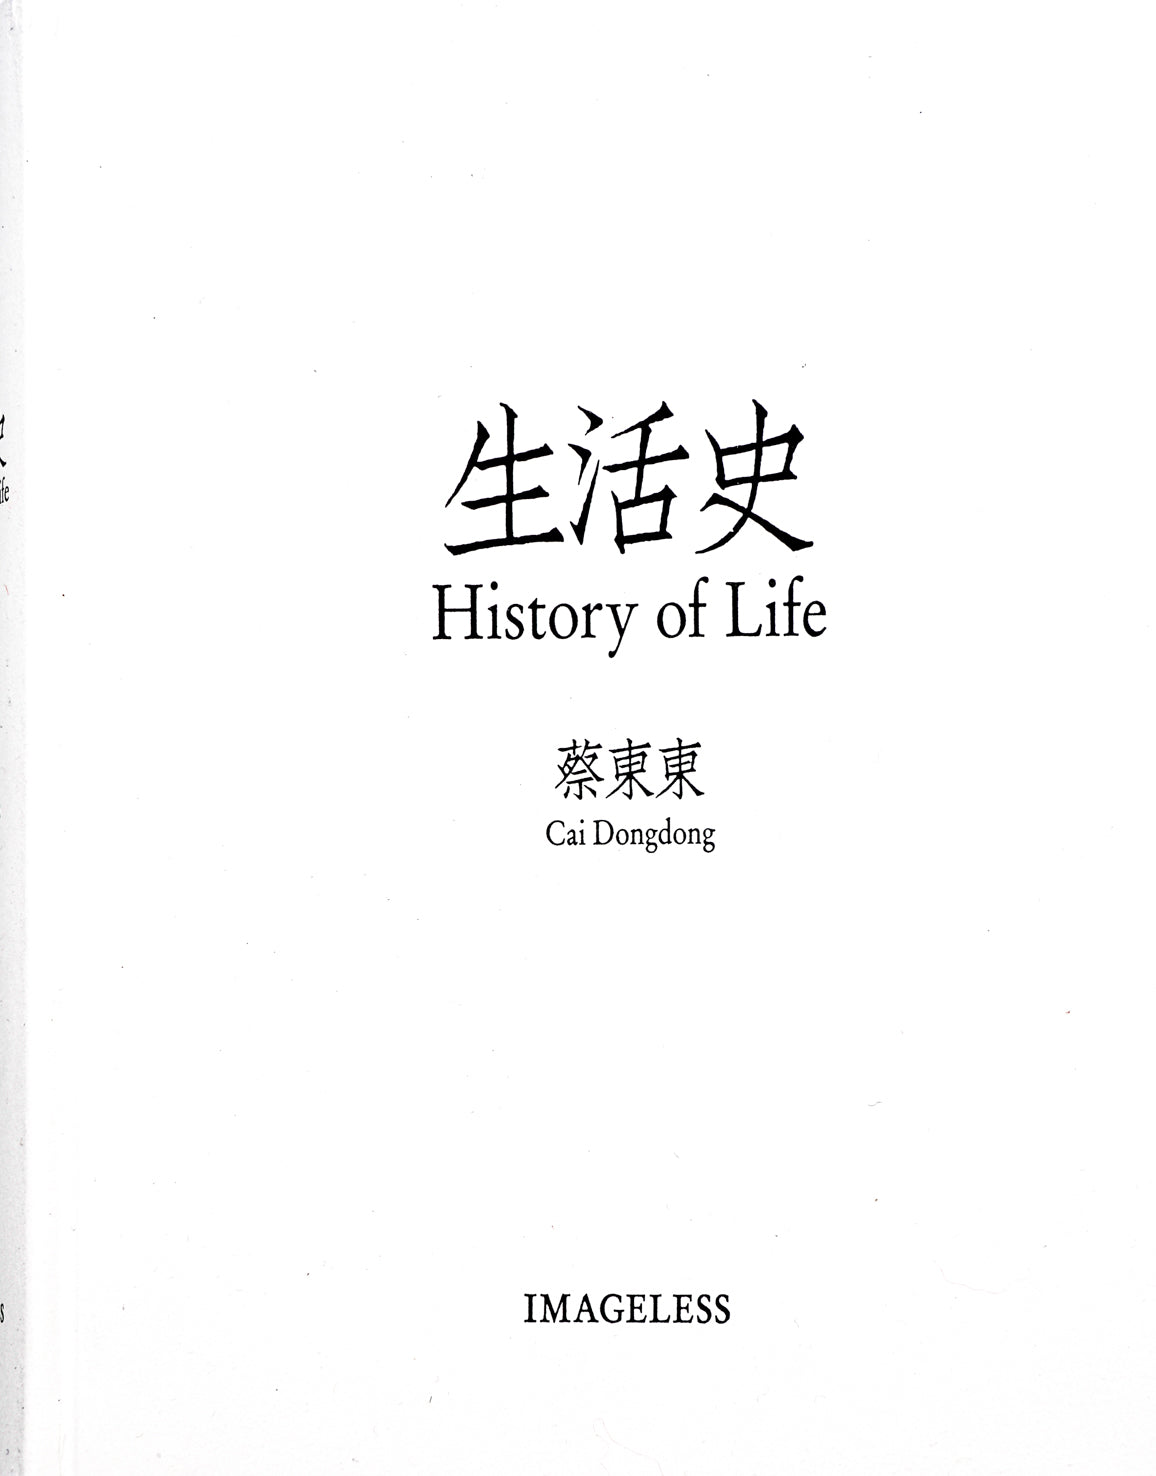 The hardback book cover shows the title and author in delicate black type on a white background. The typography is both in Chinese and English. 